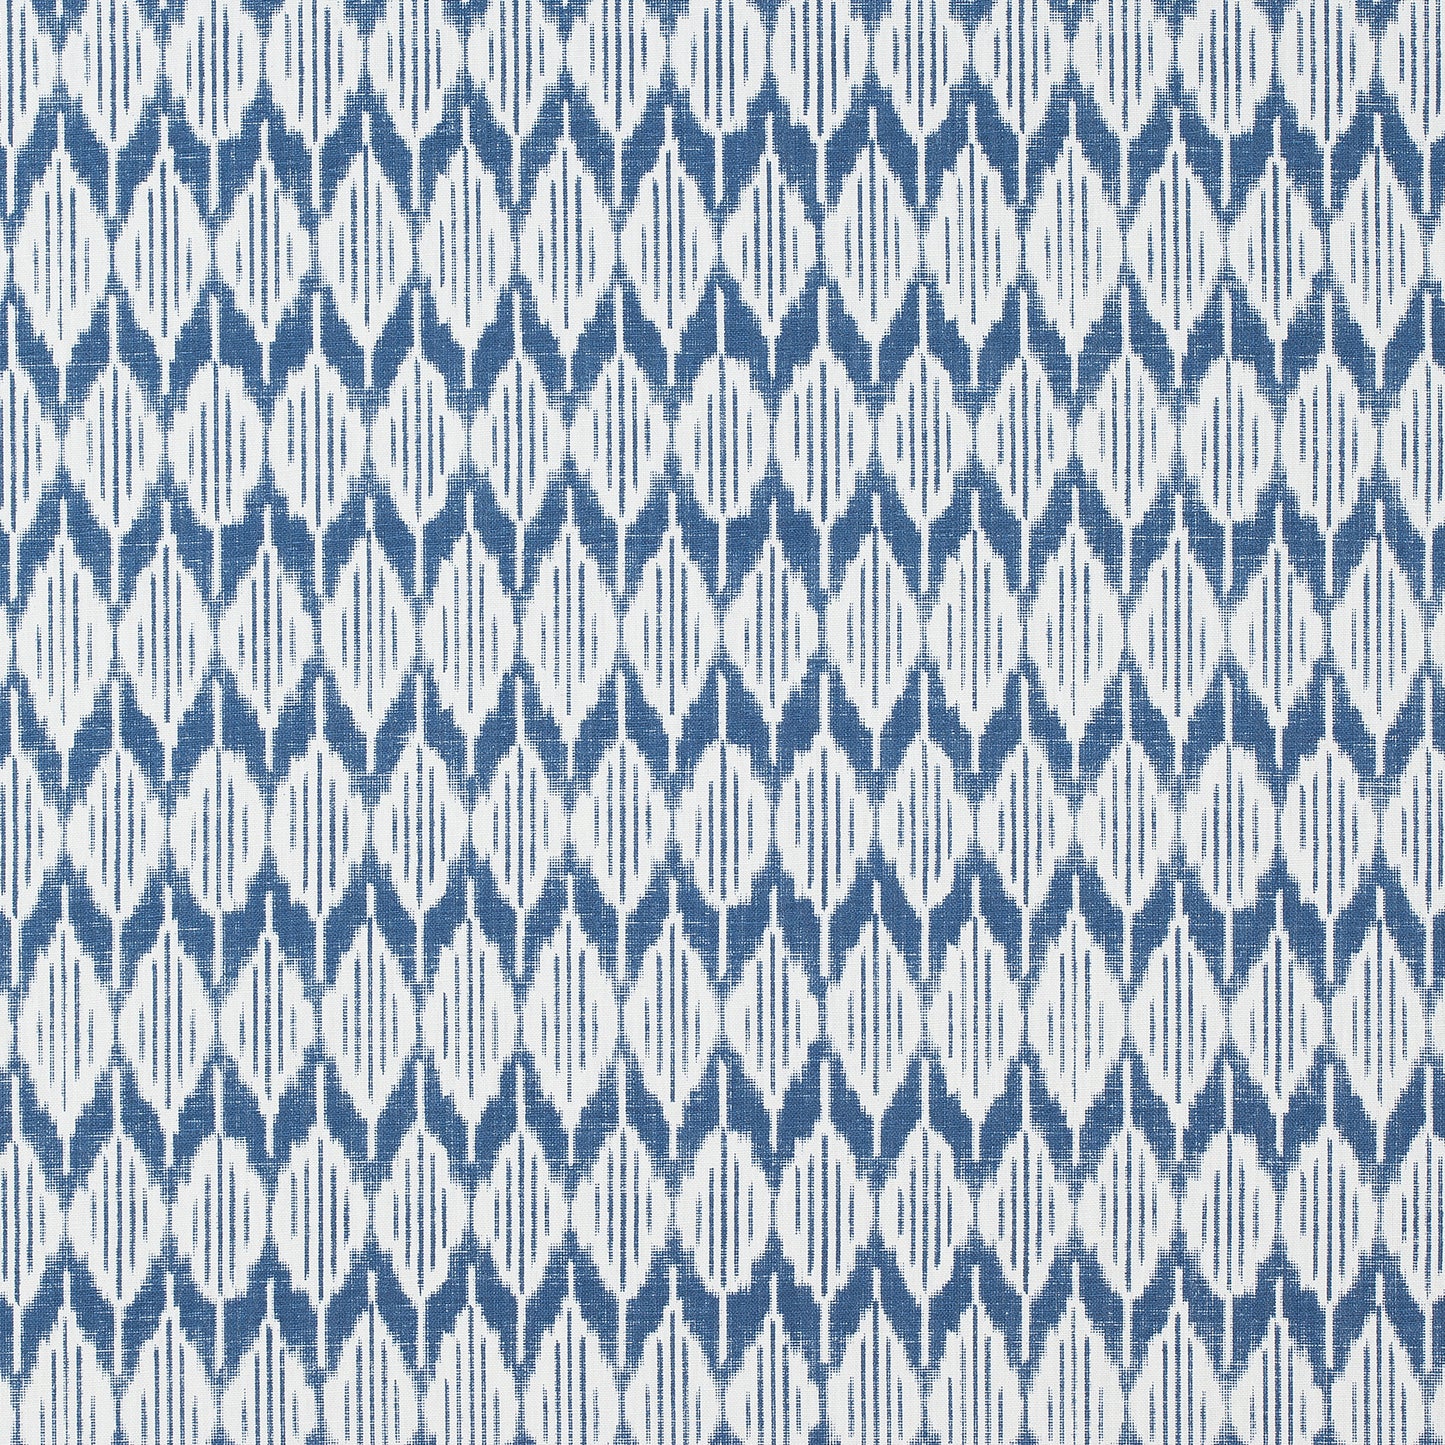 Purchase  Ann French Fabric Product AF73023  pattern name  Balin Ikat